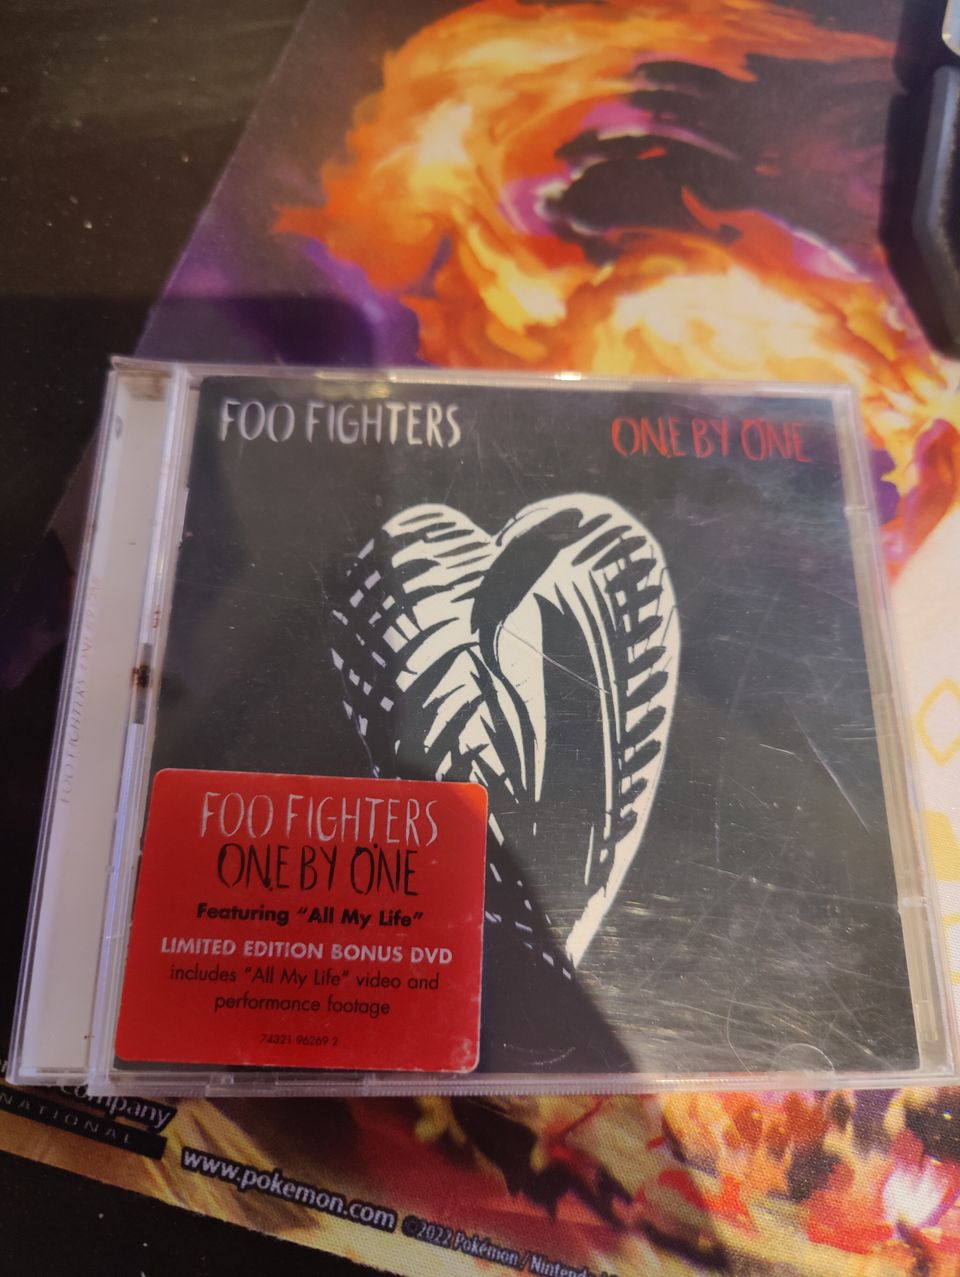 Foo fighters one by one CD